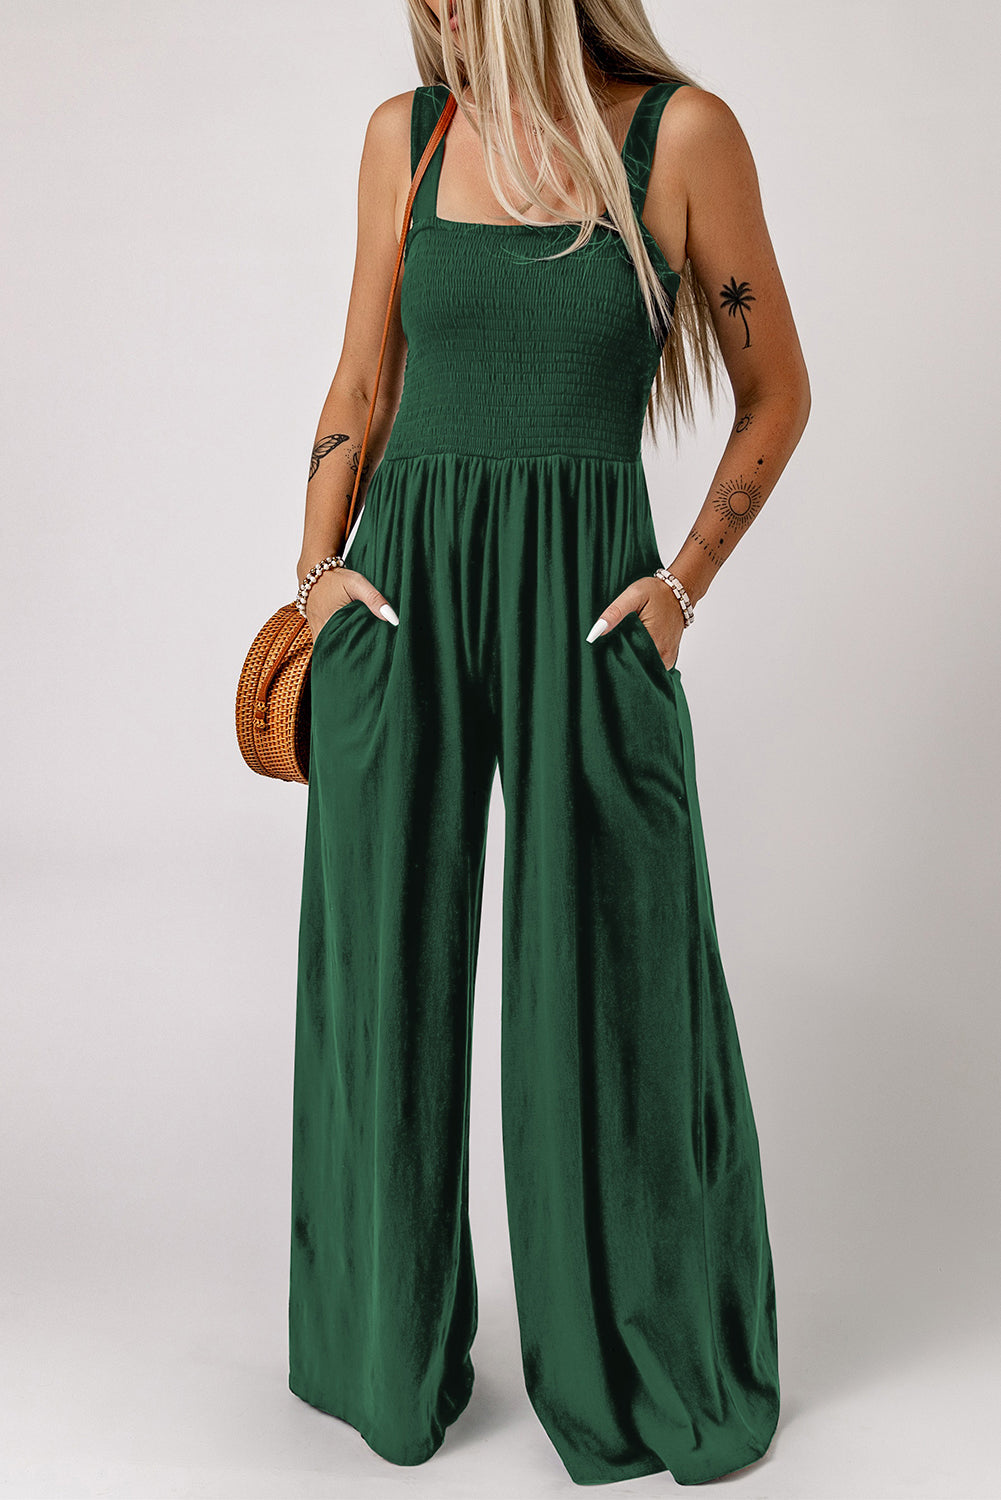 Smocked Square Neck Wide Leg Jumpsuit with Pockets- ONLINE ONLY 2-7 DAY SHIP